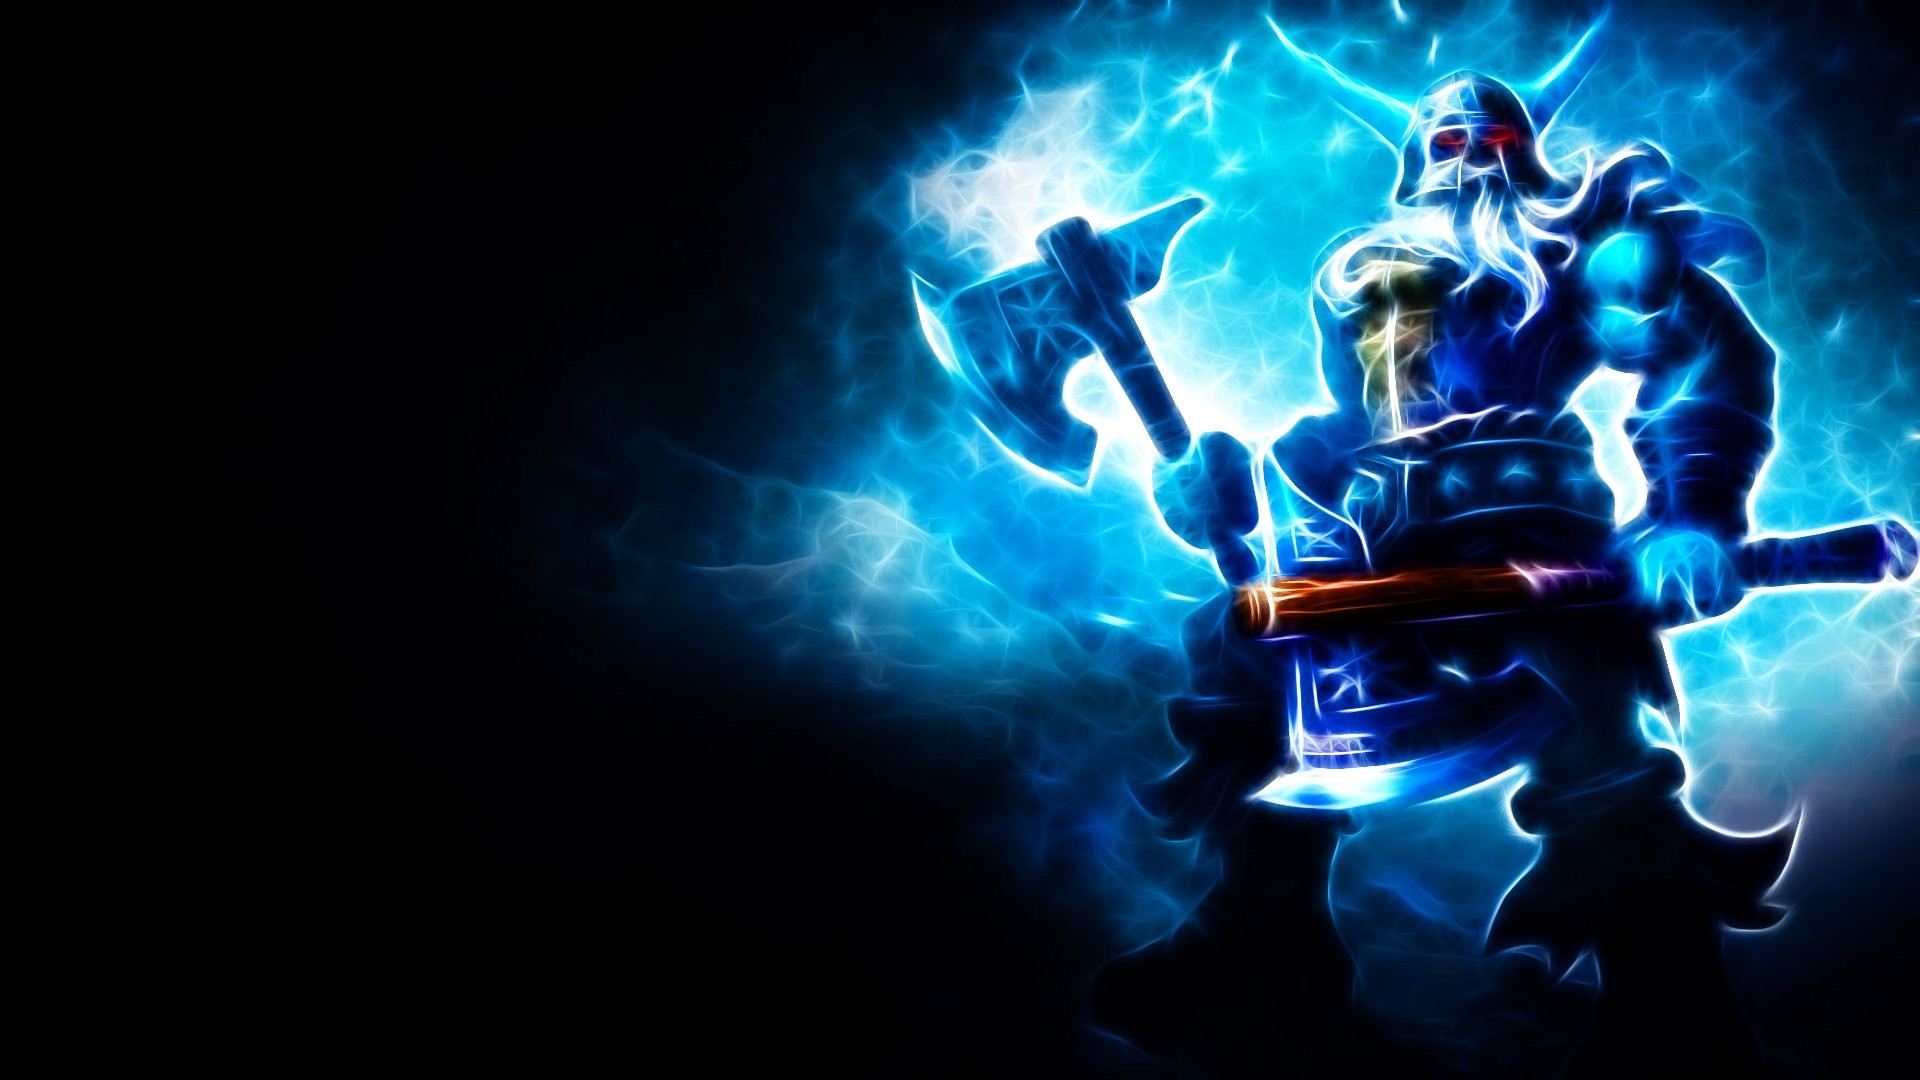 1920x1080 ... nocturne wallpapers group 76; league of legends olaf walldevil ...